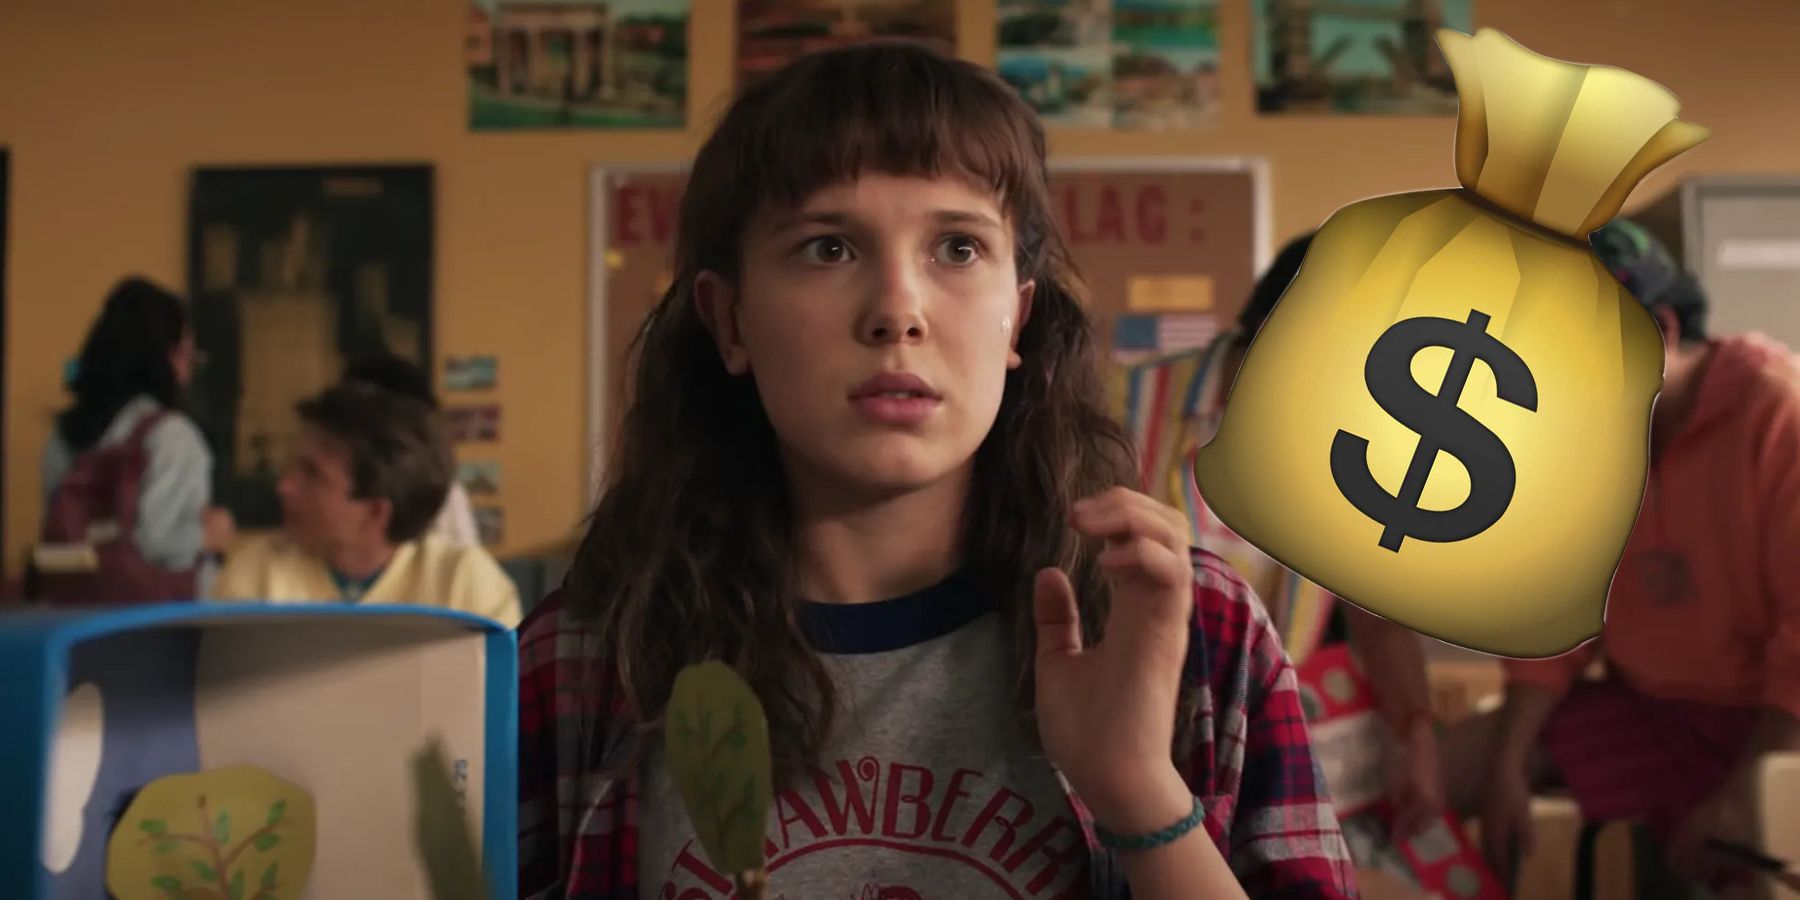 Everything We Know About the Rumored 'Stranger Things' Spinoff